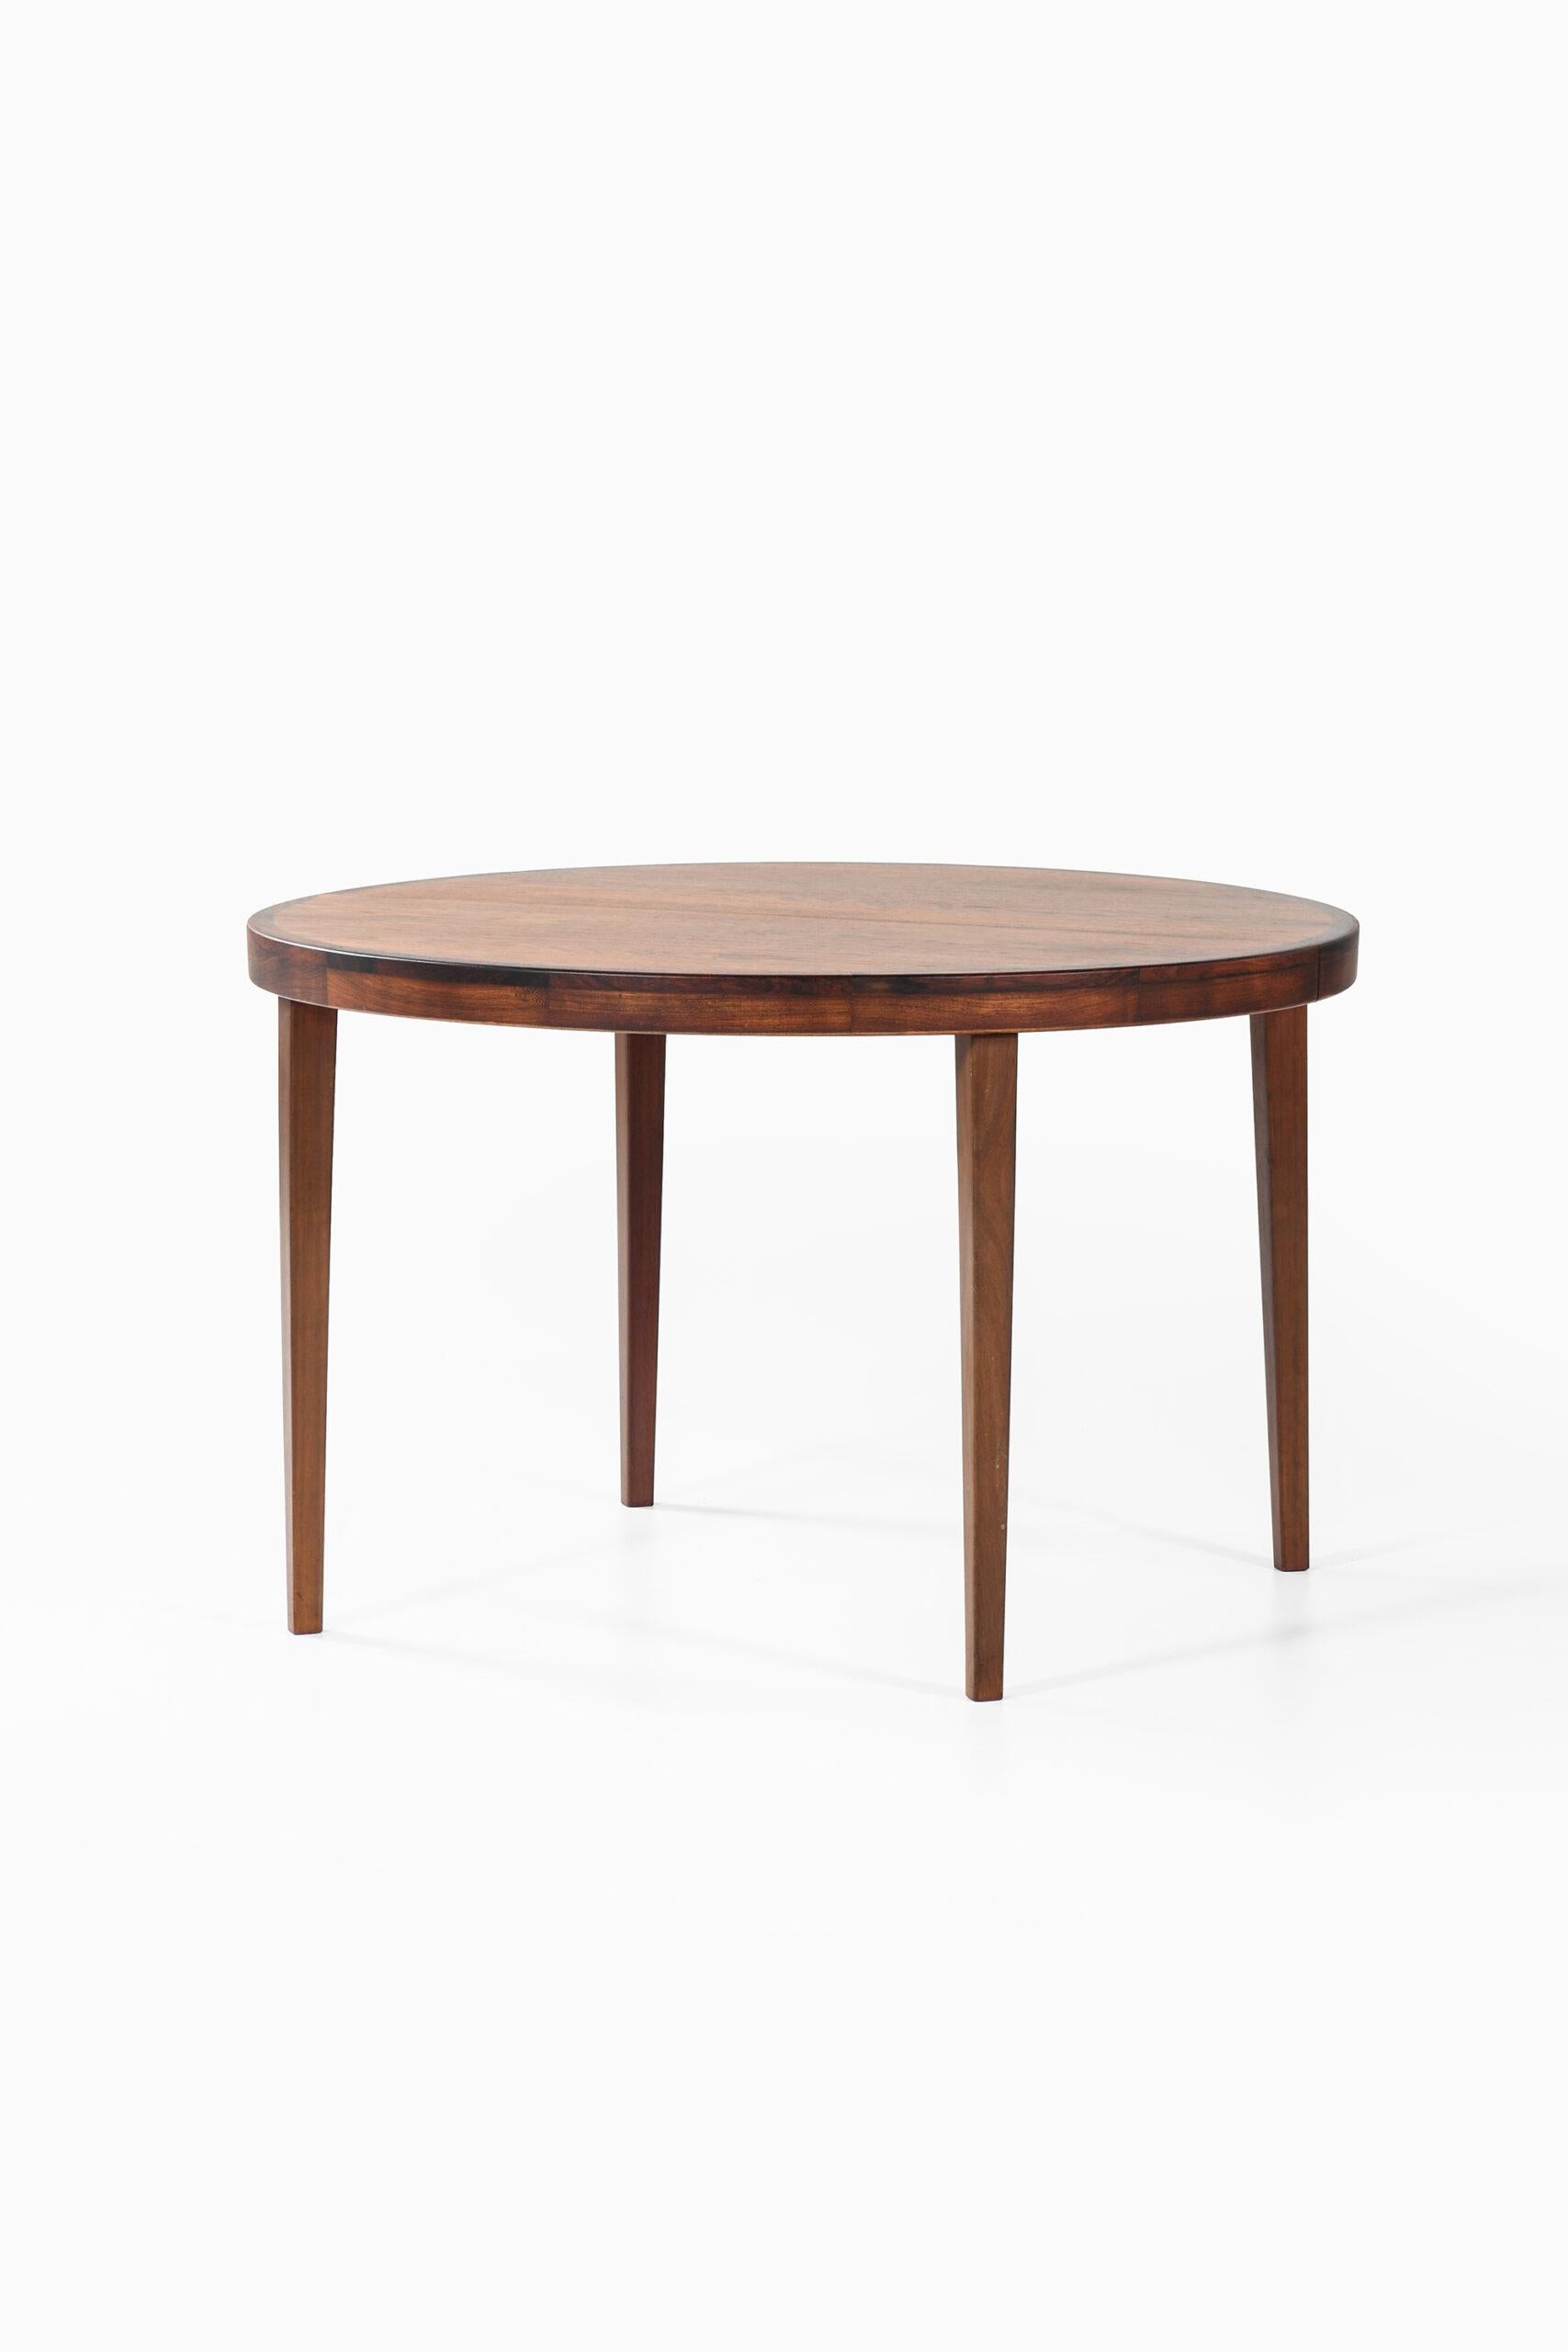 Dining table in the manner of Kai Kristiansen. Produced in Denmark.
Dimensions (W x D x H): 120 ( 229 ) x 120 x 72 cm.